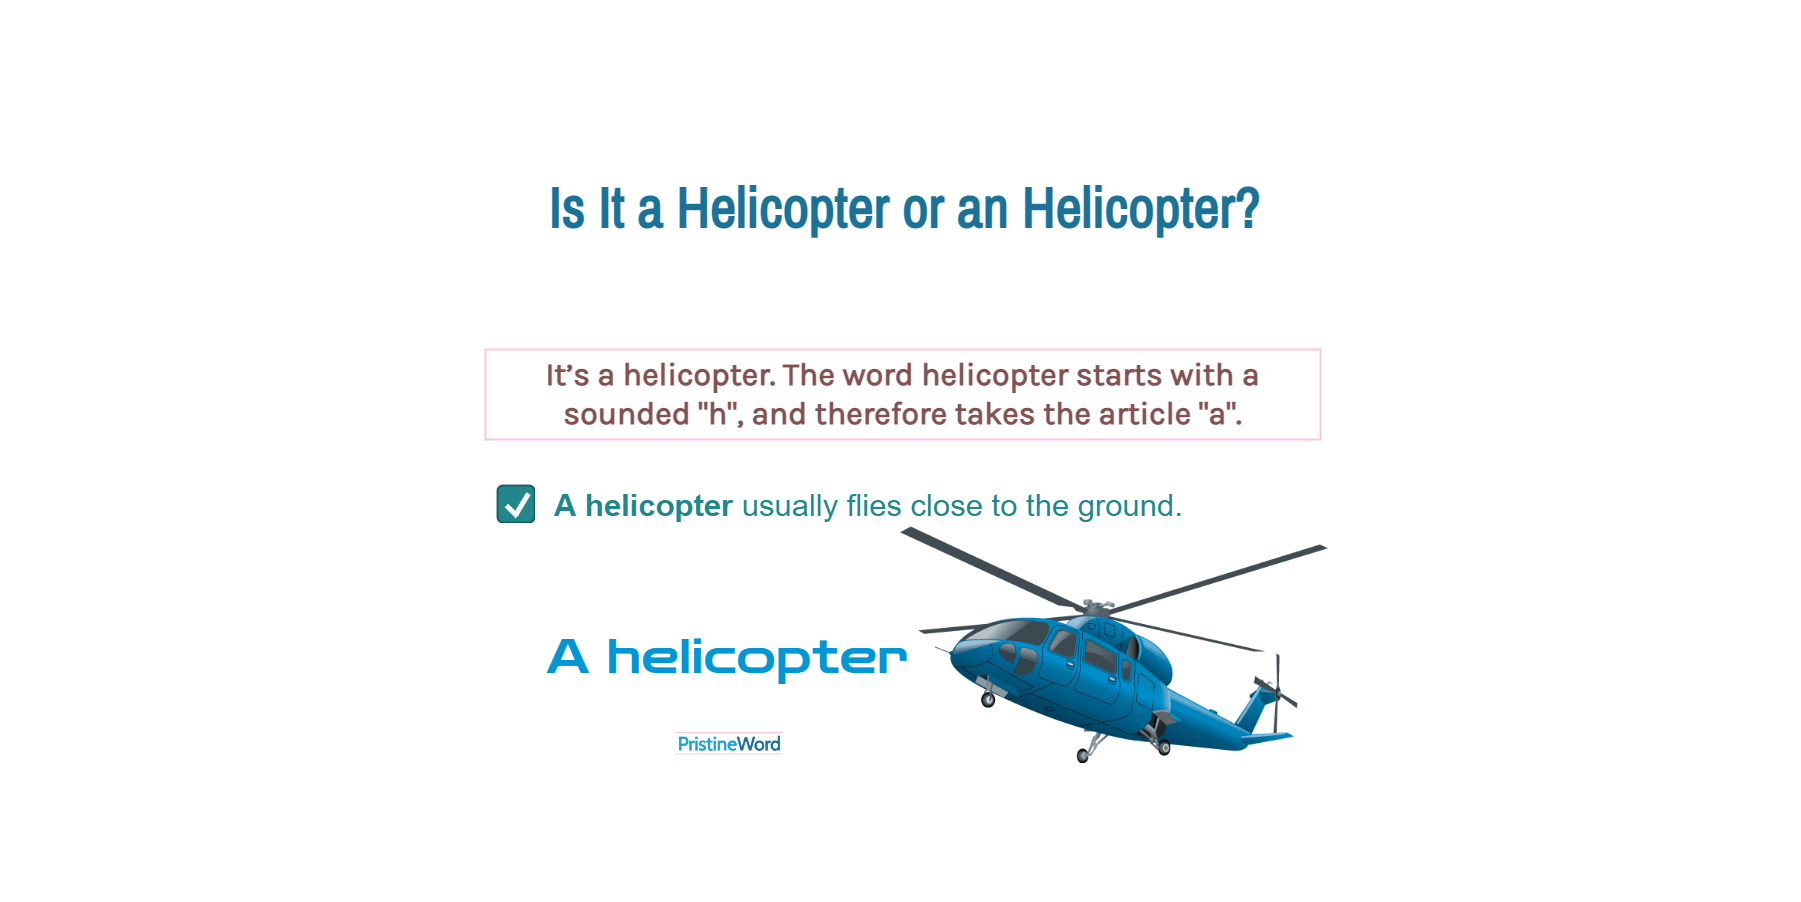 Is It a Helicopter or an Helicopter?